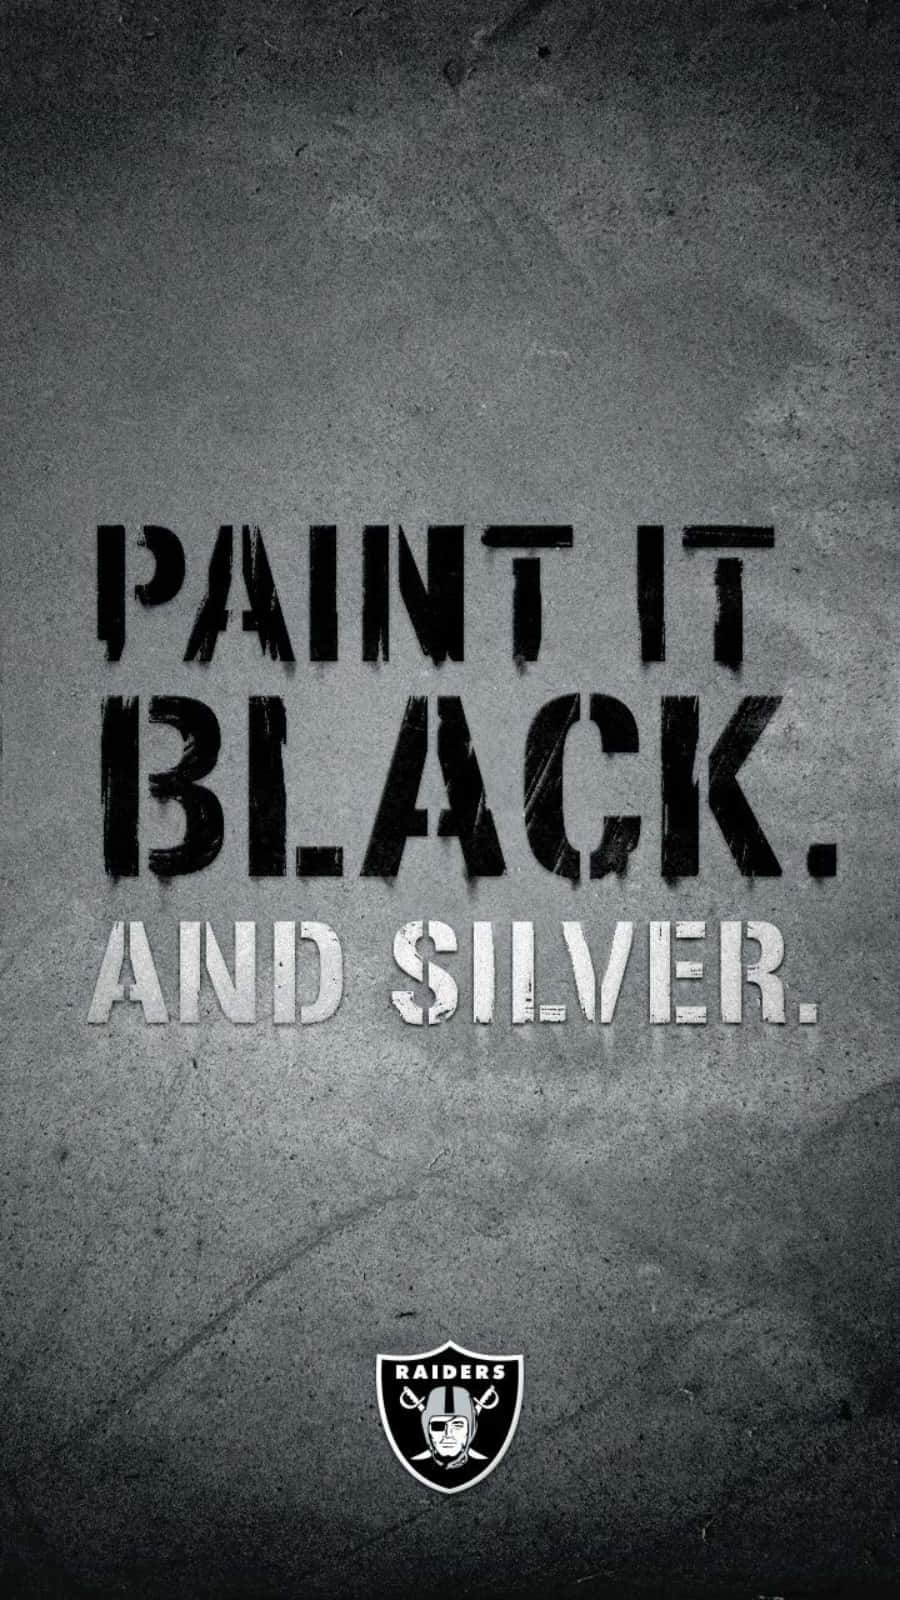 Raiders Logo Paint It Black And Silver Wallpaper